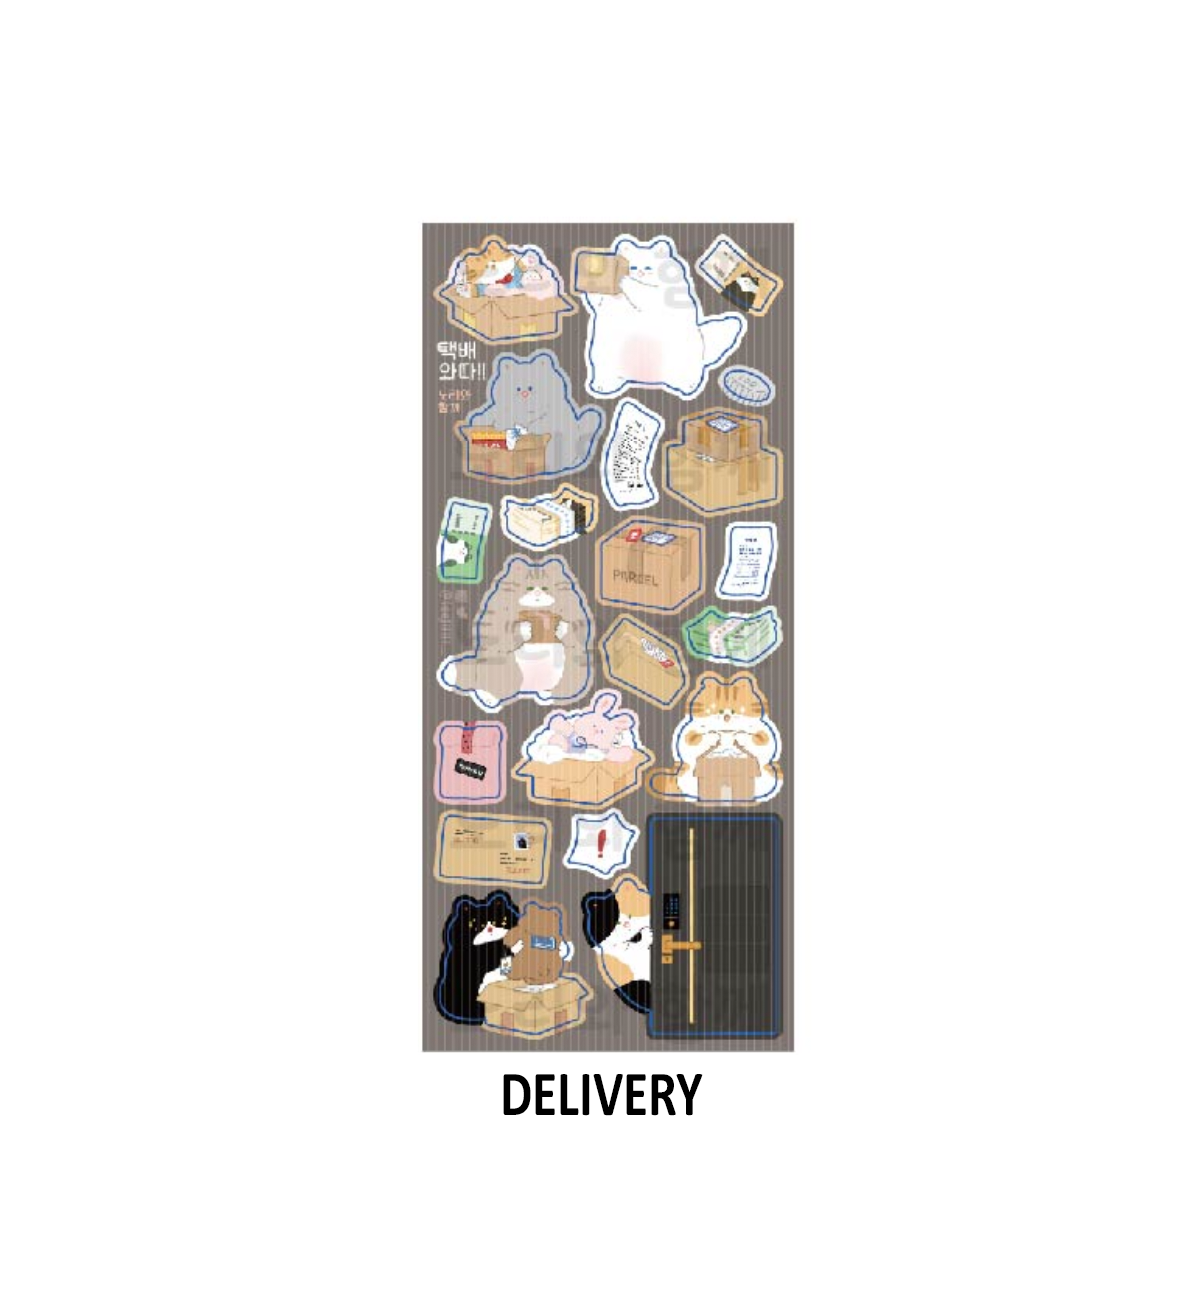 Shopping & Delivery Seal Sticker